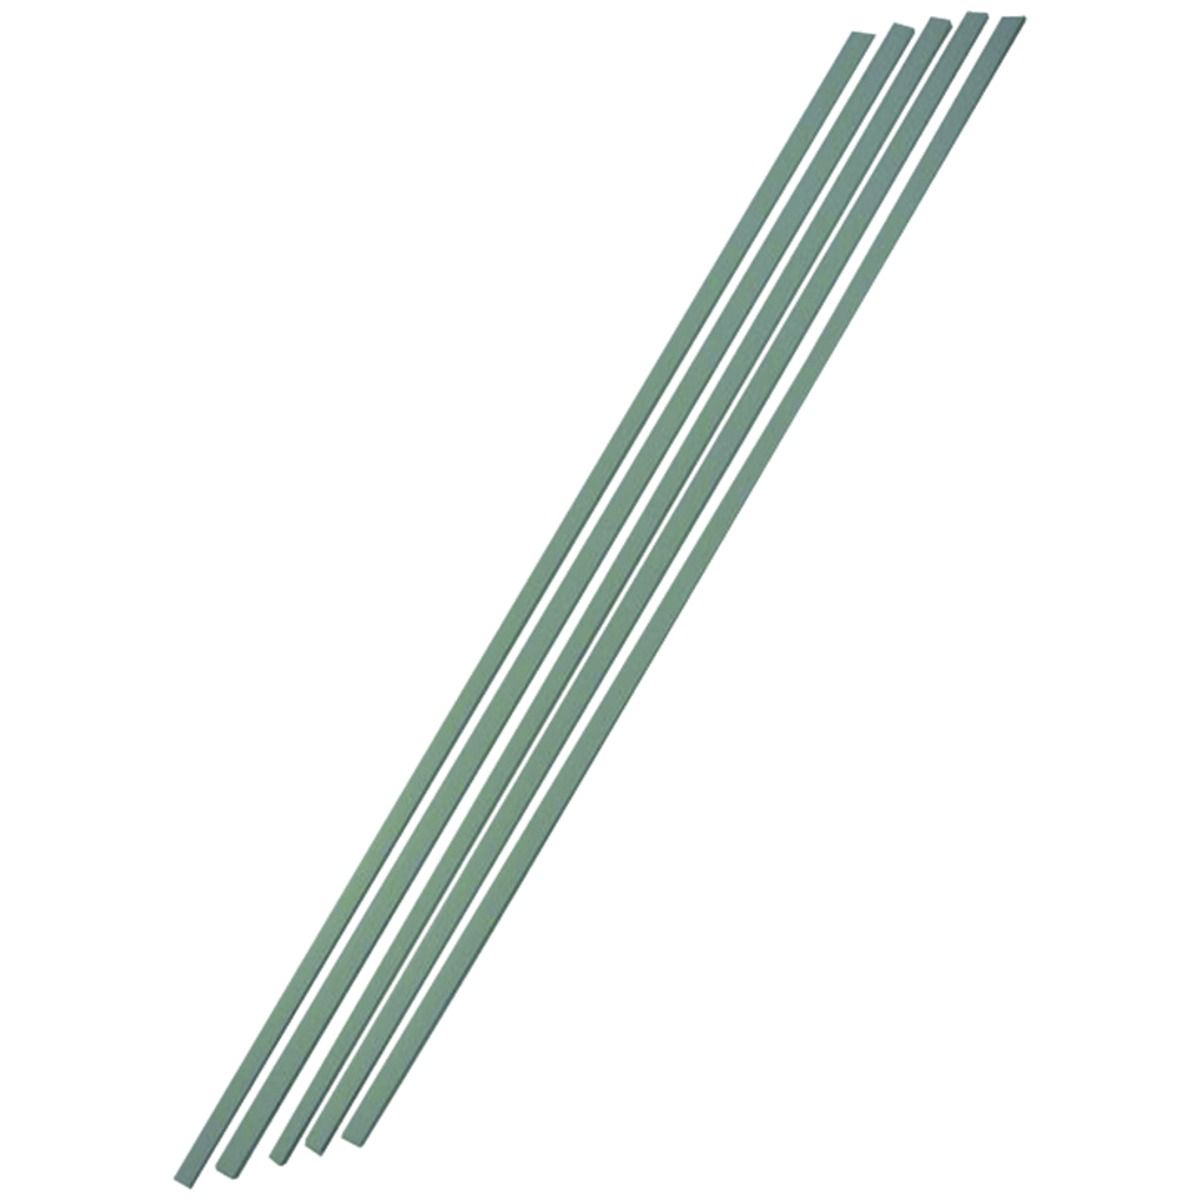 Image of Wickes Intumescent Seal - 4 x 15mm x 1m - Pack of 5